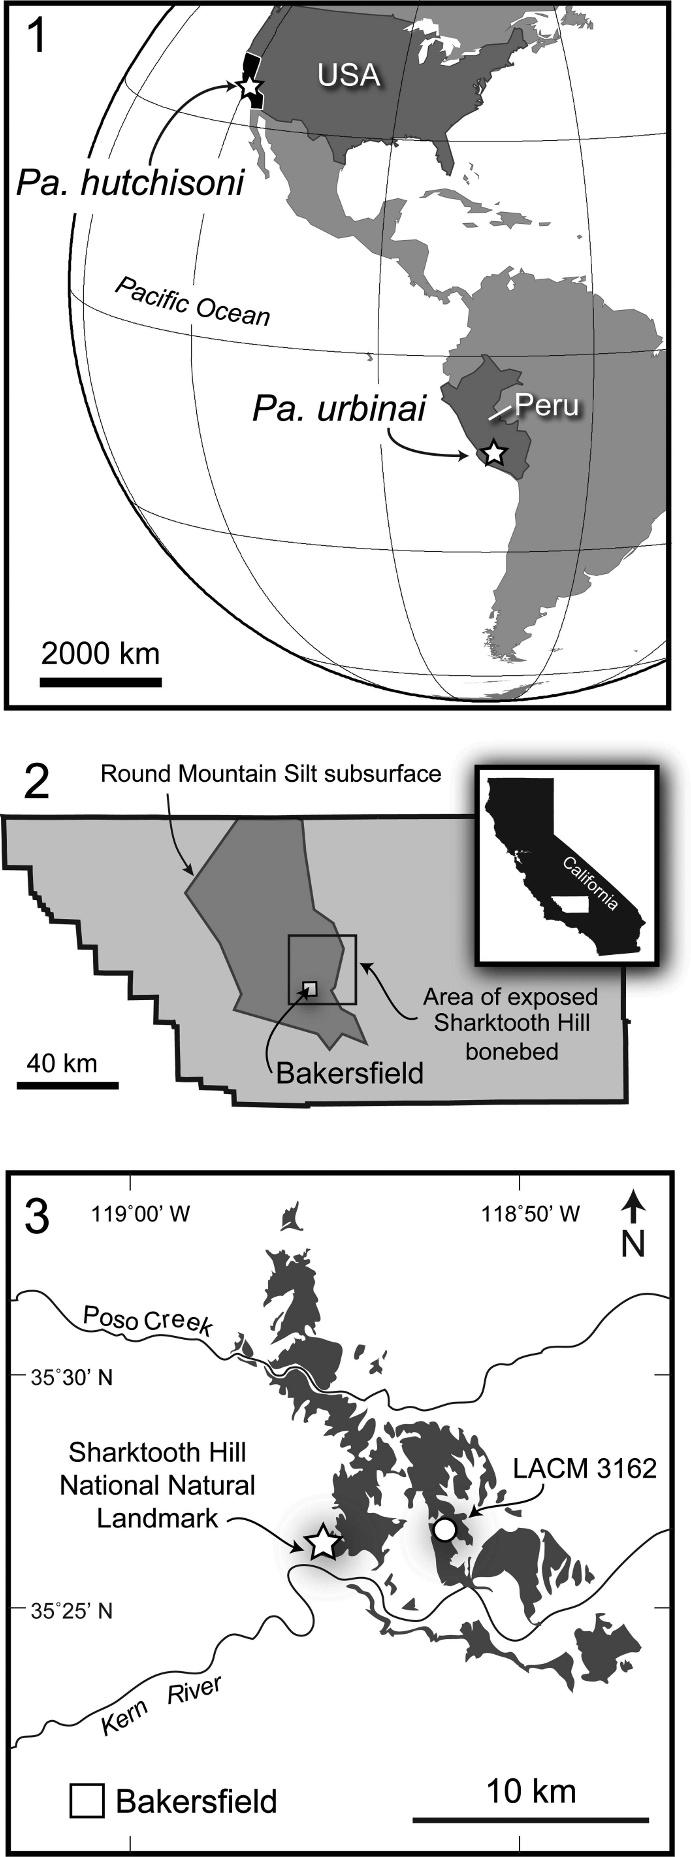 236 JOURNAL OF PALEONTOLOGY, V. 84, NO. 2, 2010 Occurrence. The type locality of Pa. hutchisoni is LACM locality 3162, from the Round Mountain Silt Formation, in Kern County, California, USA (Fig. 4).